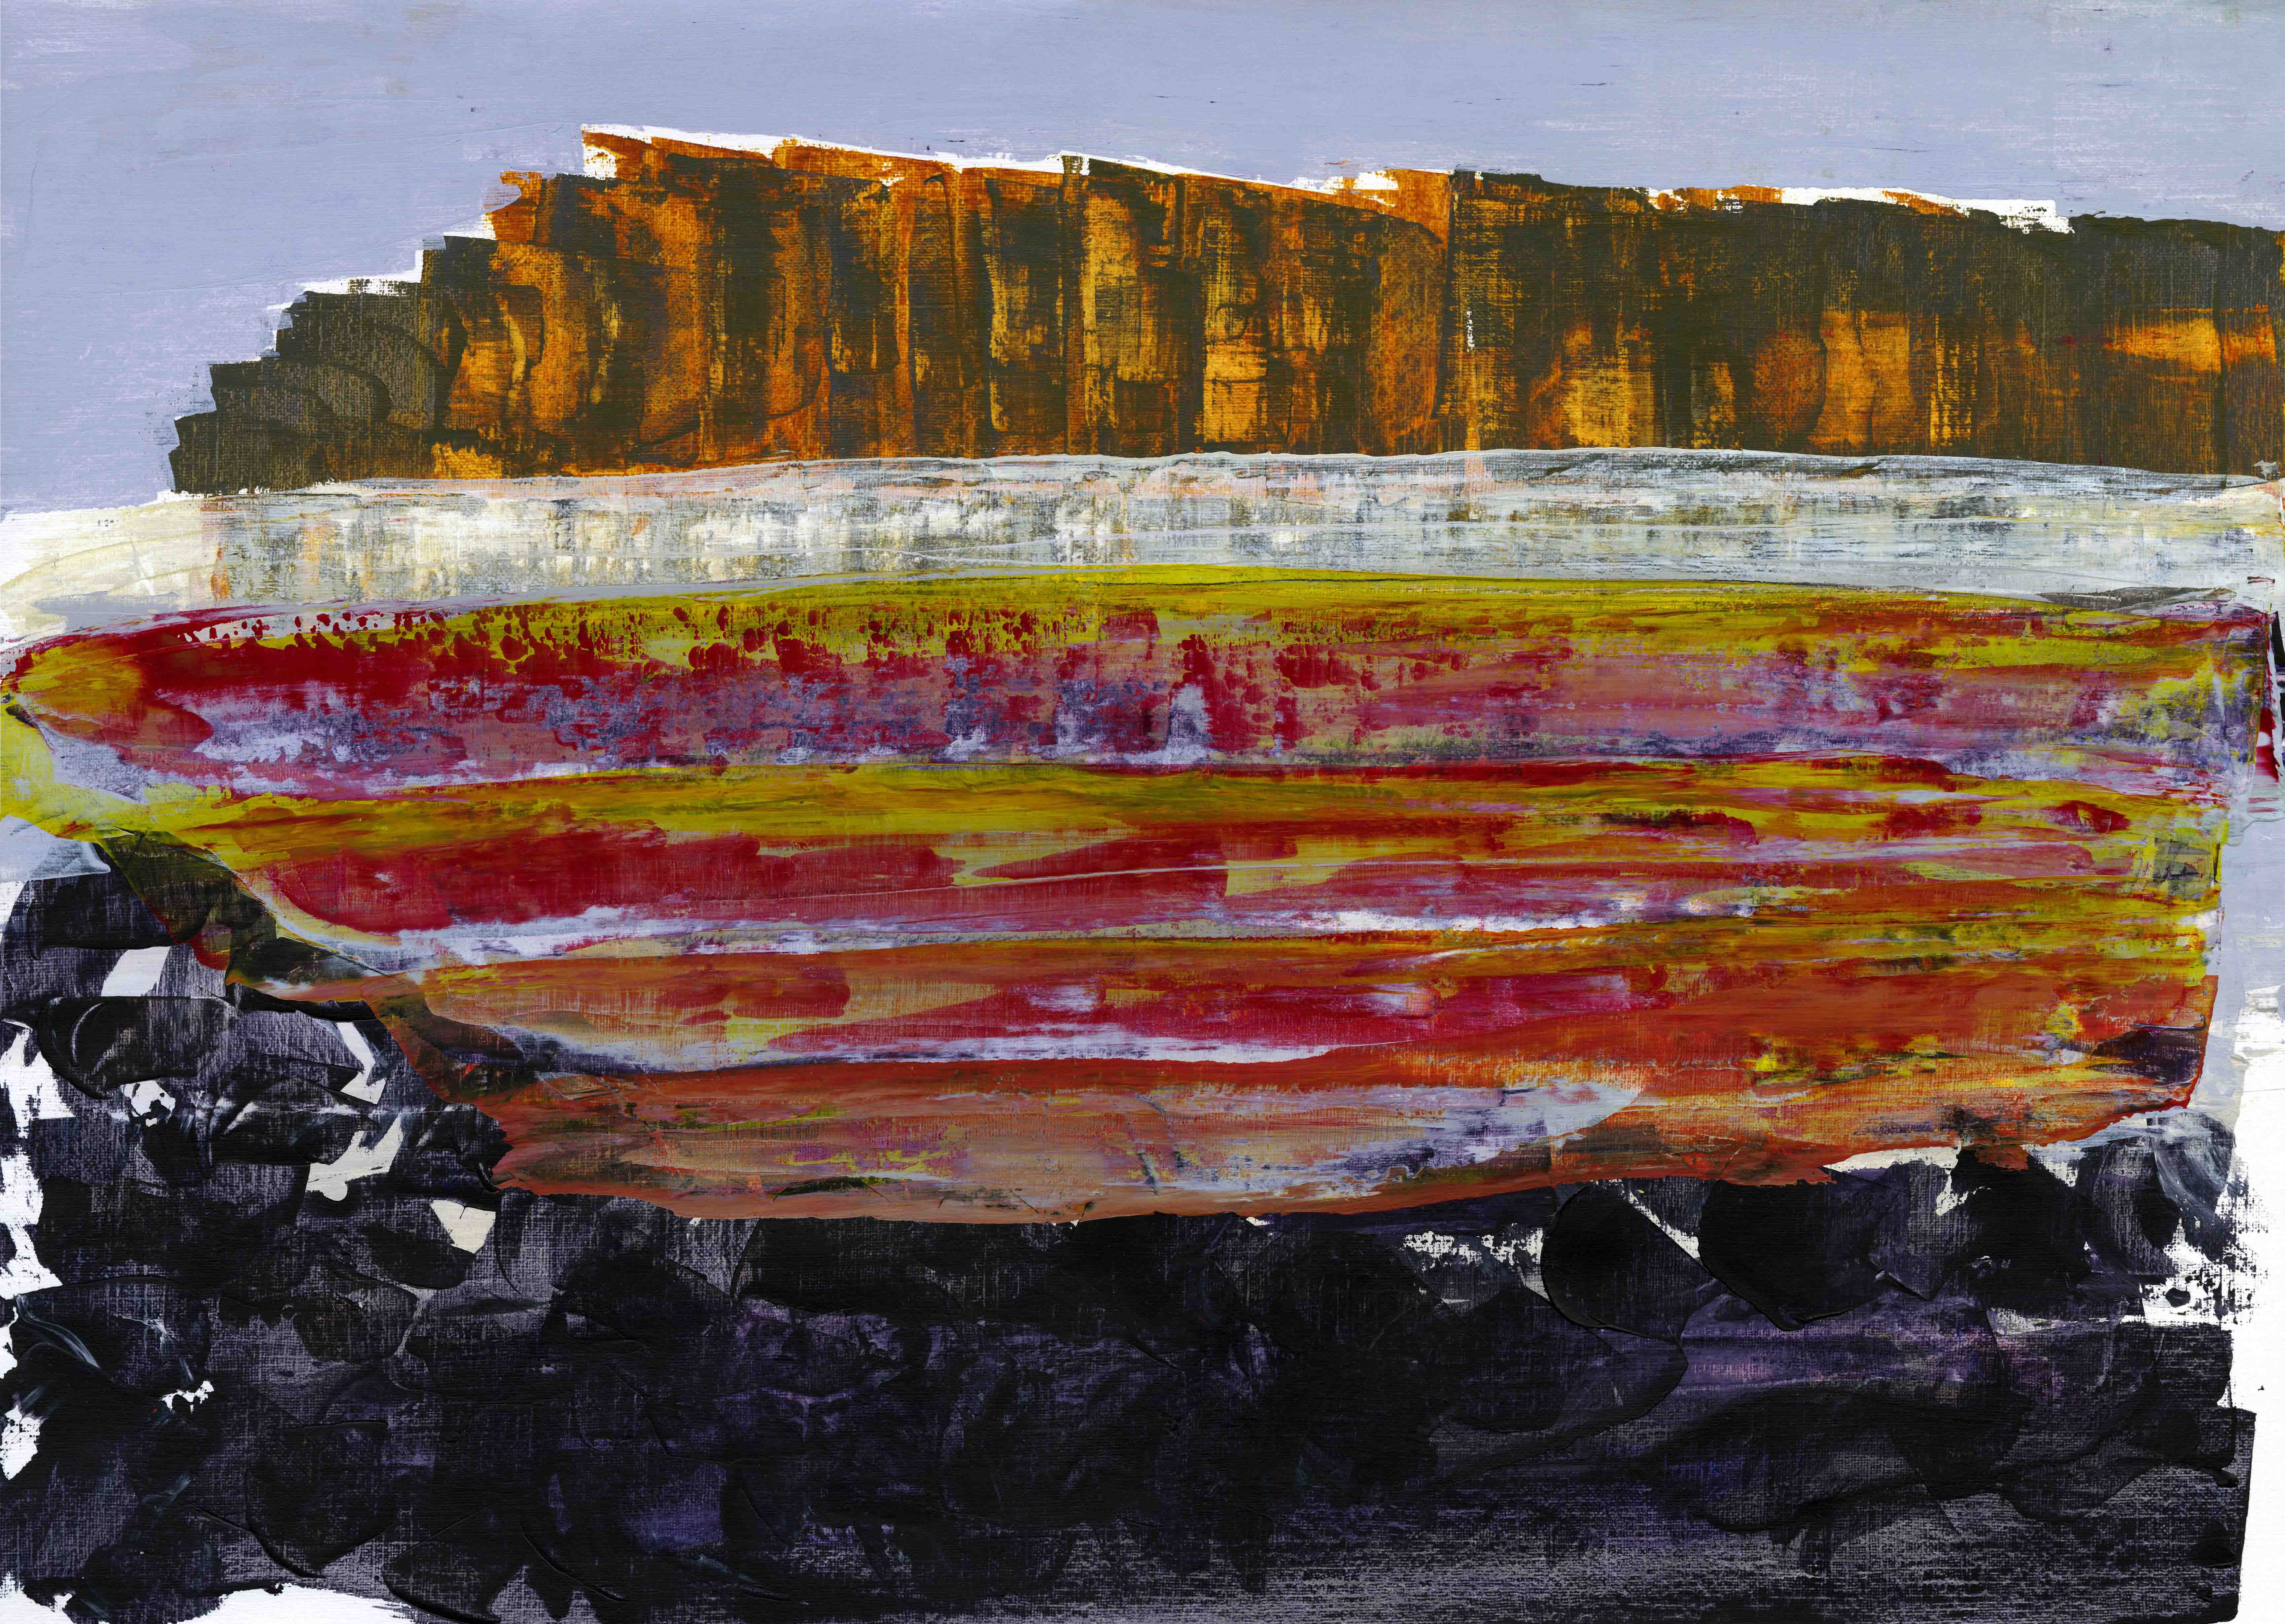 Art based on the natural landscape of the Causeway Coast, Northern Ireland.